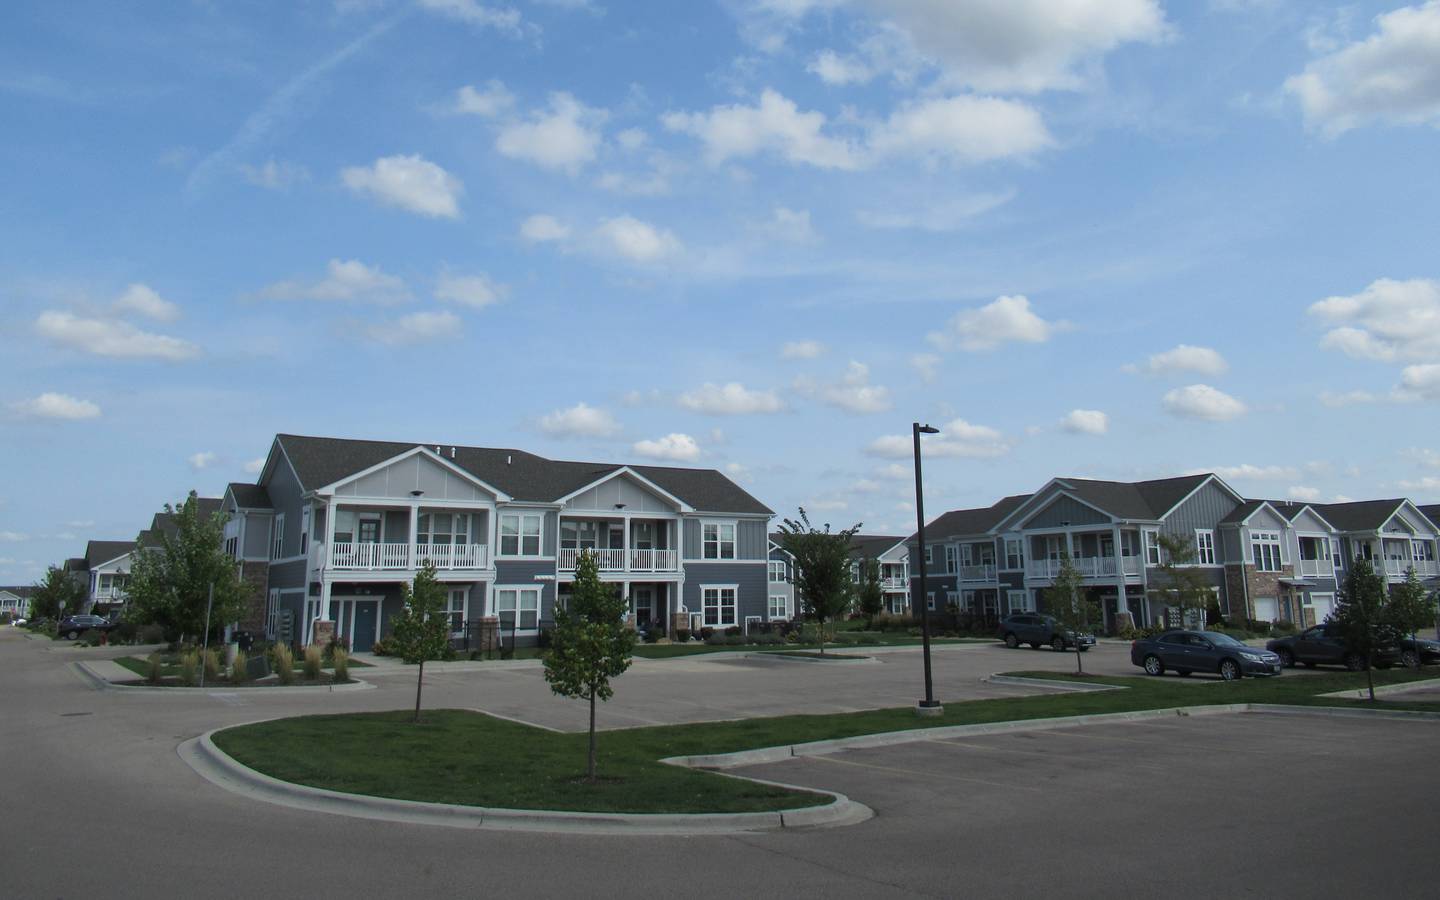 The Springs at Oswego opened their luxury apartment community located at 801 Fifth St. off of Route 34 in 2019. Photo from Sept. 15 2022.